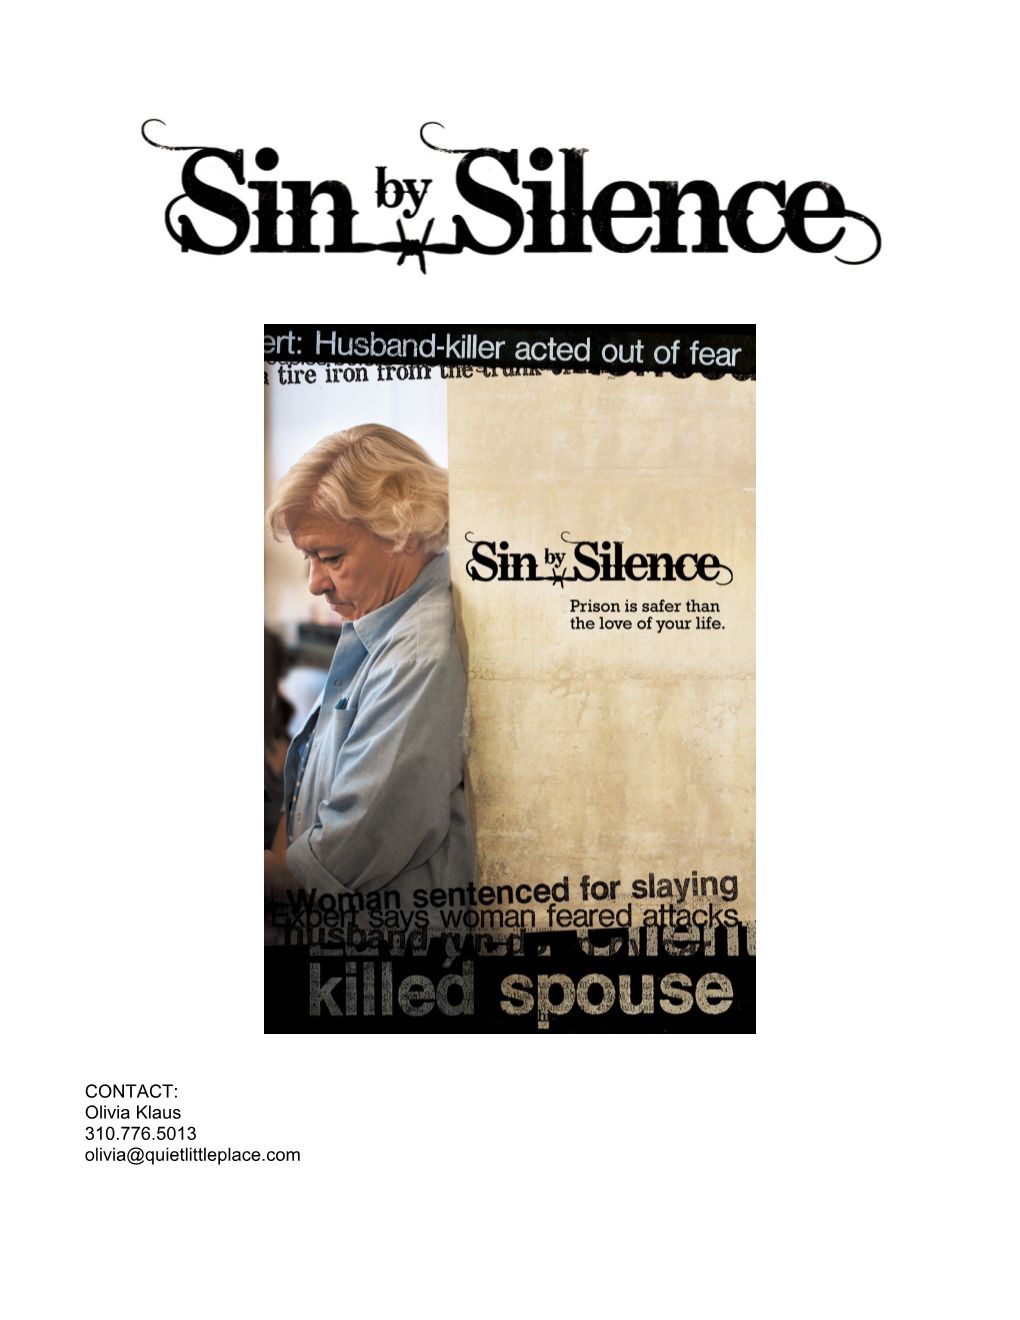 From Behind Prison Walls, SIN by SILENCE Reveals the Lives of Extraordinary Women Who Advocate